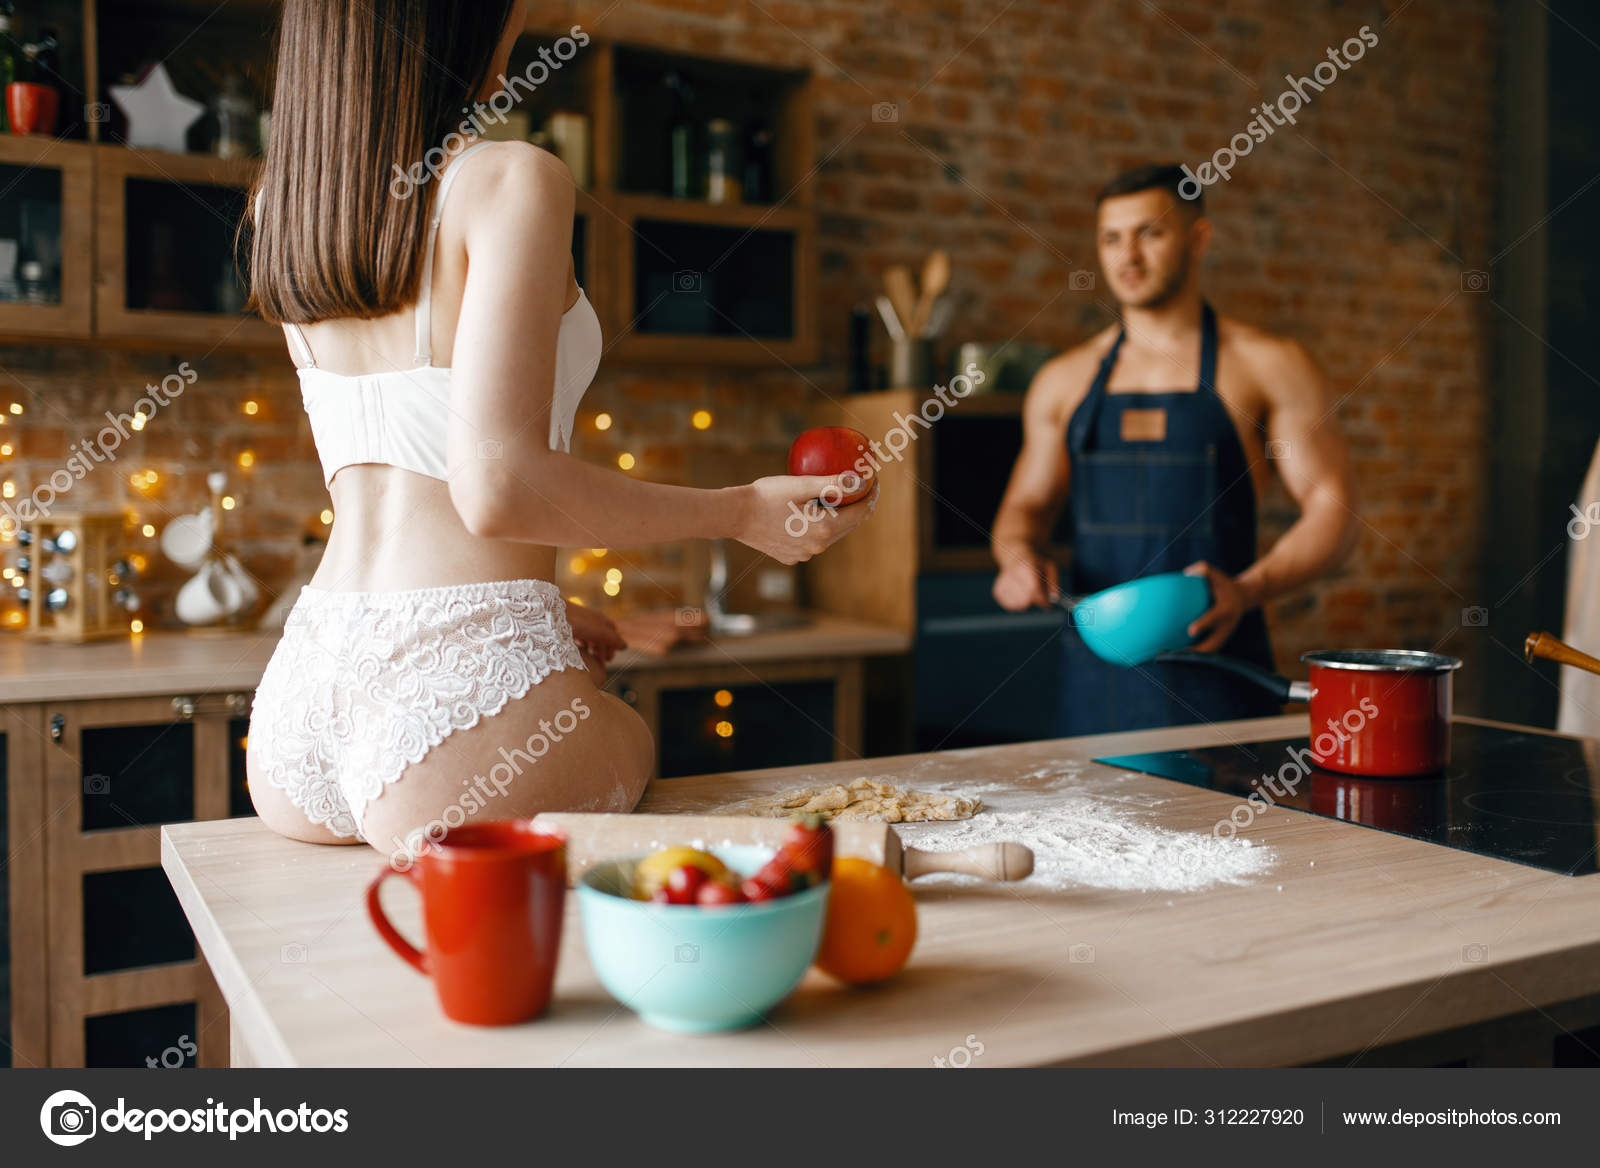 Sexy Couple Underwear Cooking Kitchen Naked Man Woman Preparing Breakfast Stock Photo By